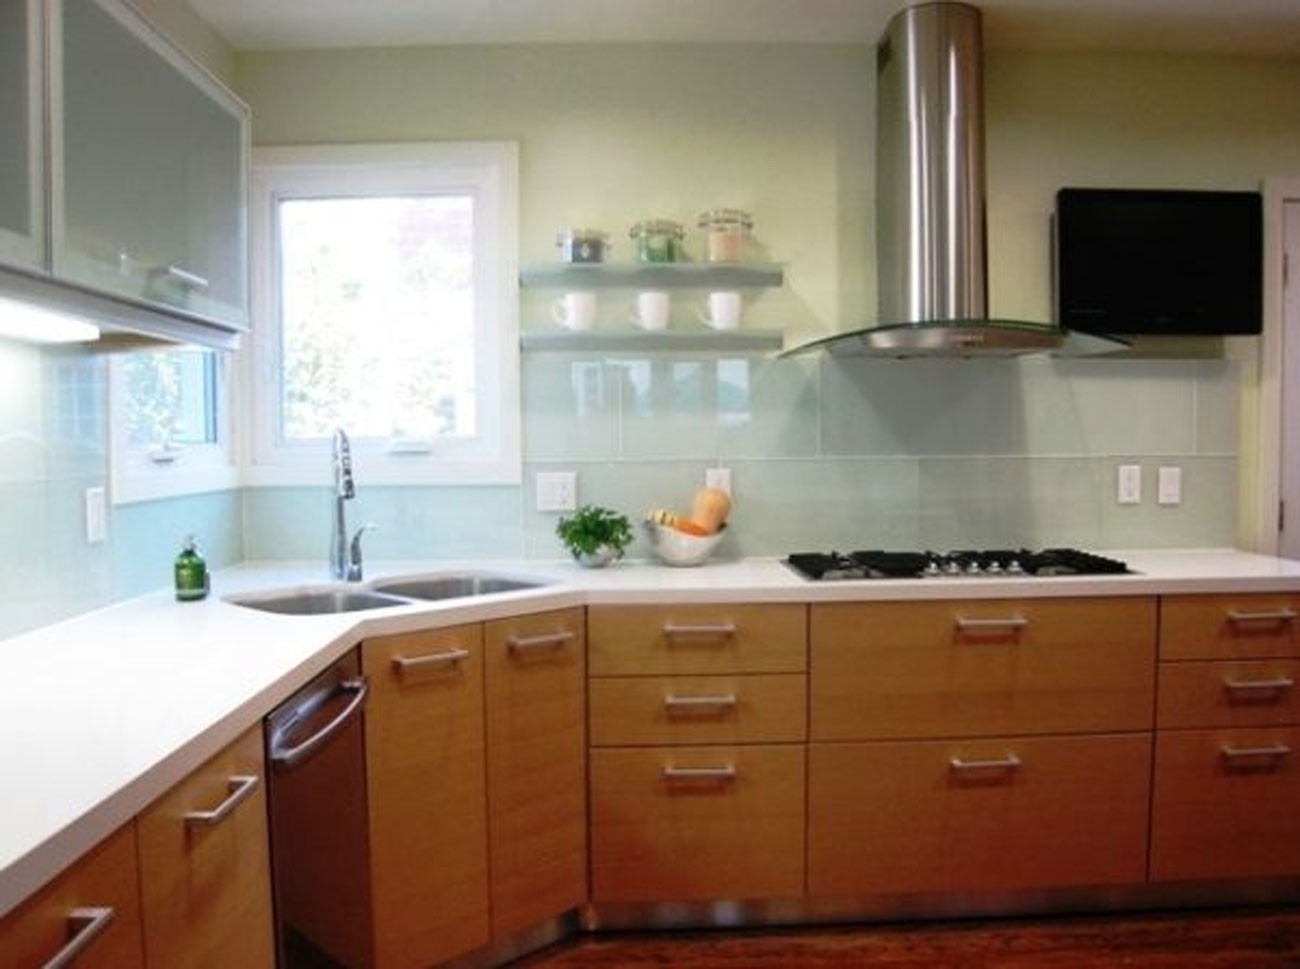 Small Kitchen Sink Cabinets
 of Kitchen Design Ideas Remodel and Decor